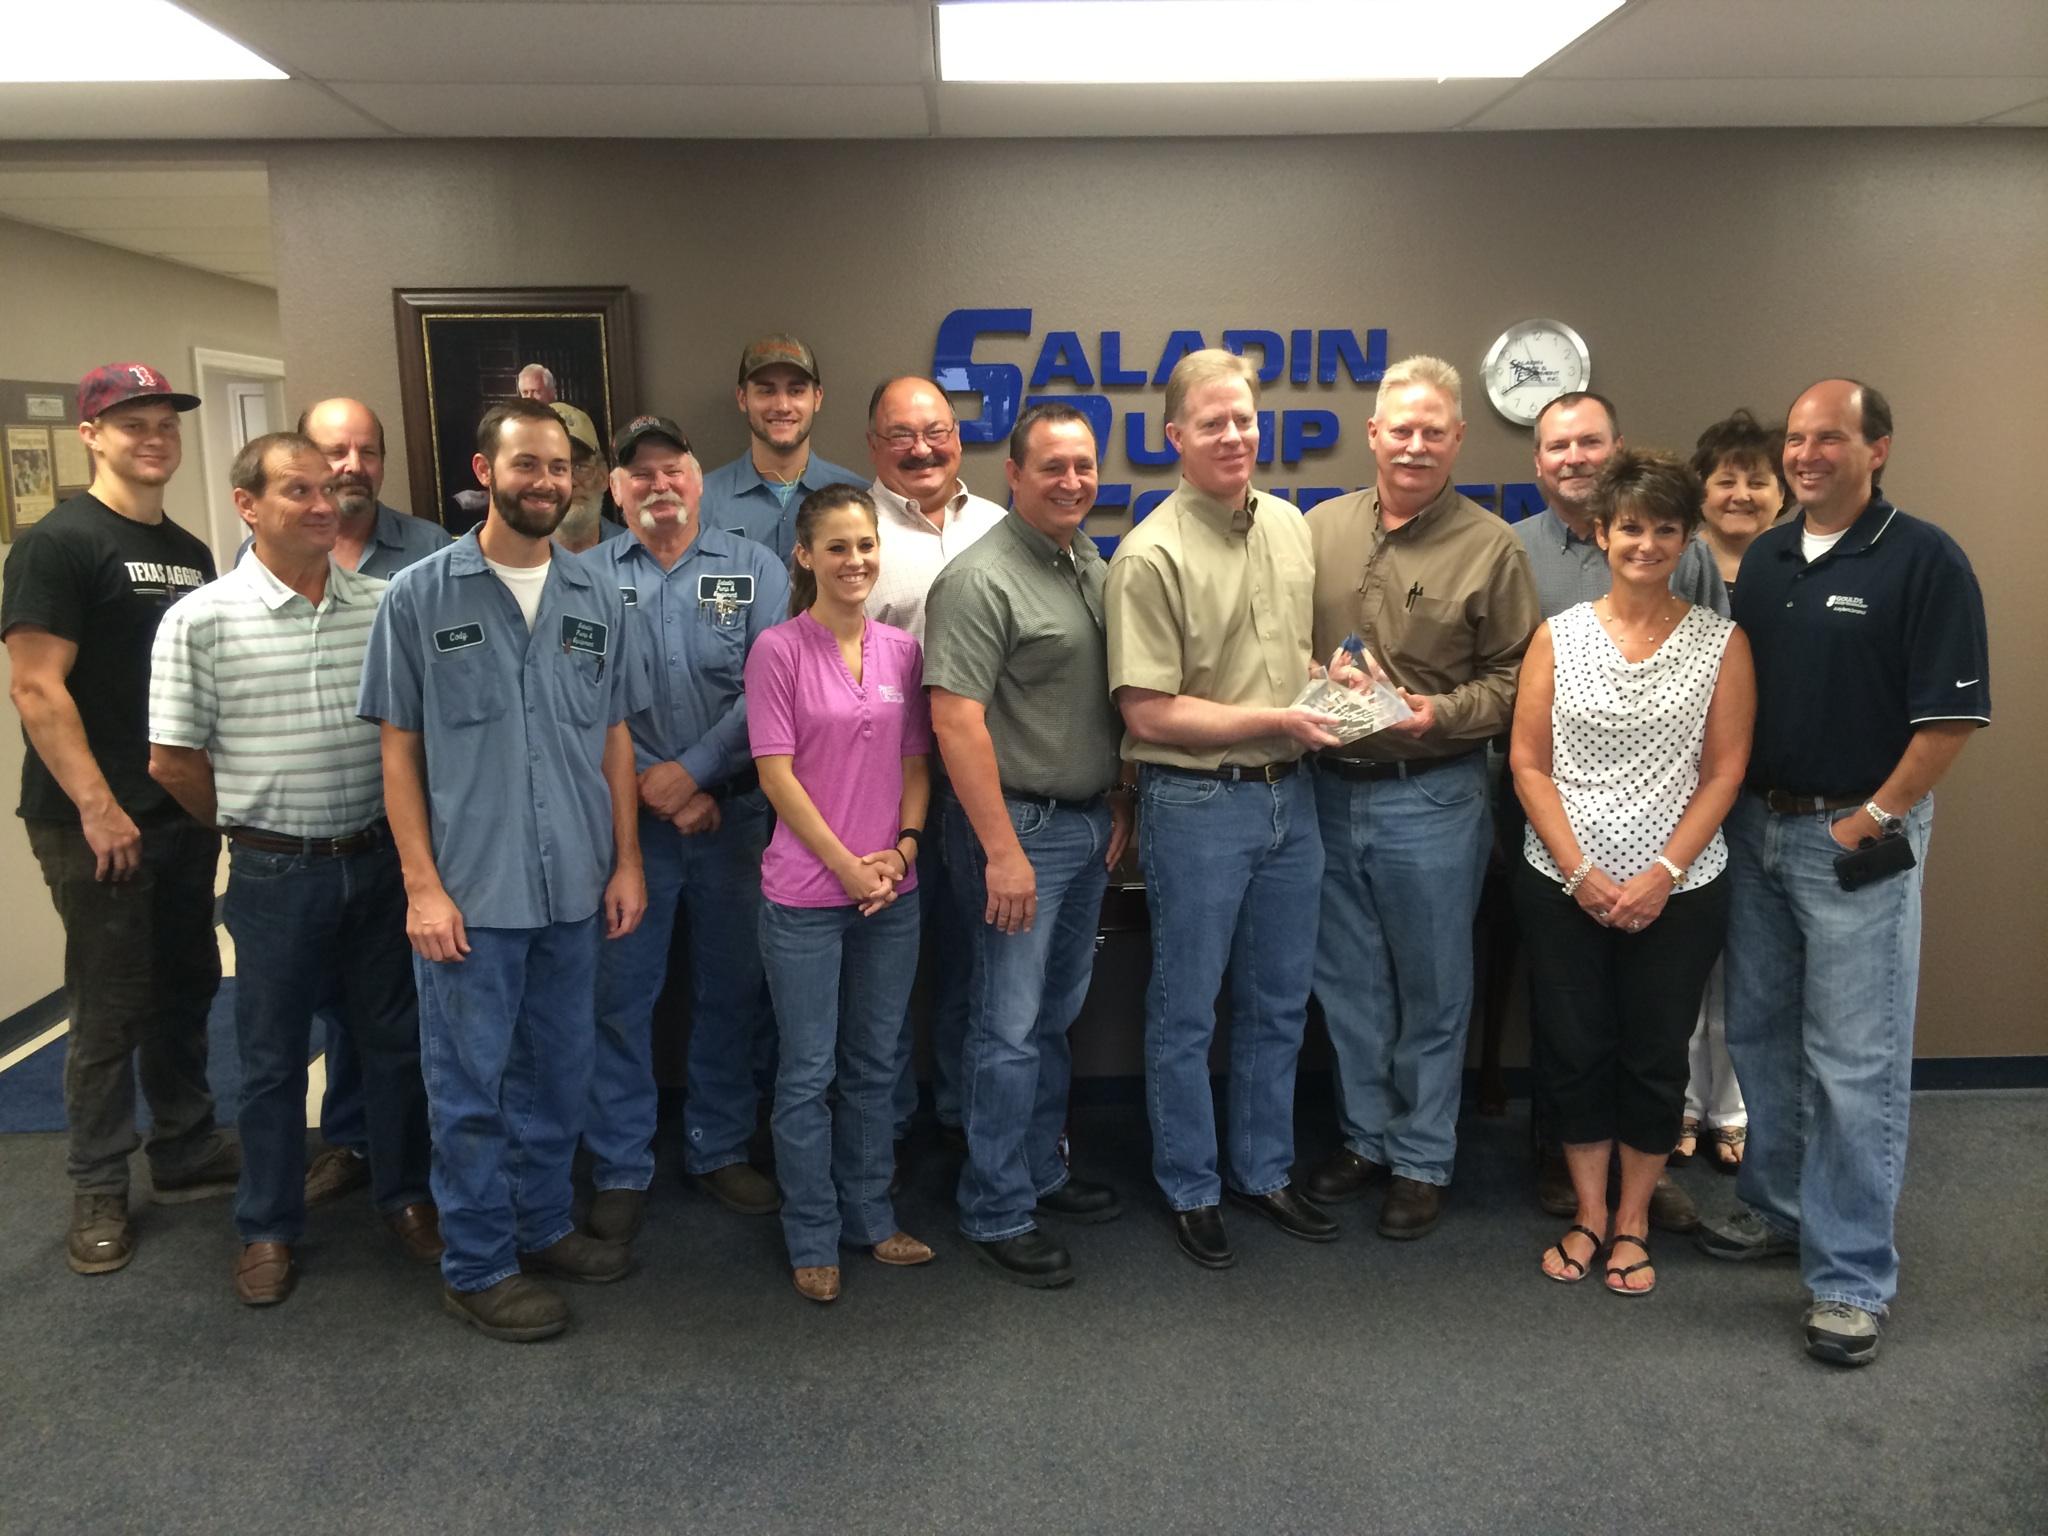 Saladin received the Blue Diamond Award naming them 2014 North America Distributor of the Year from ITT Goulds Pumps.